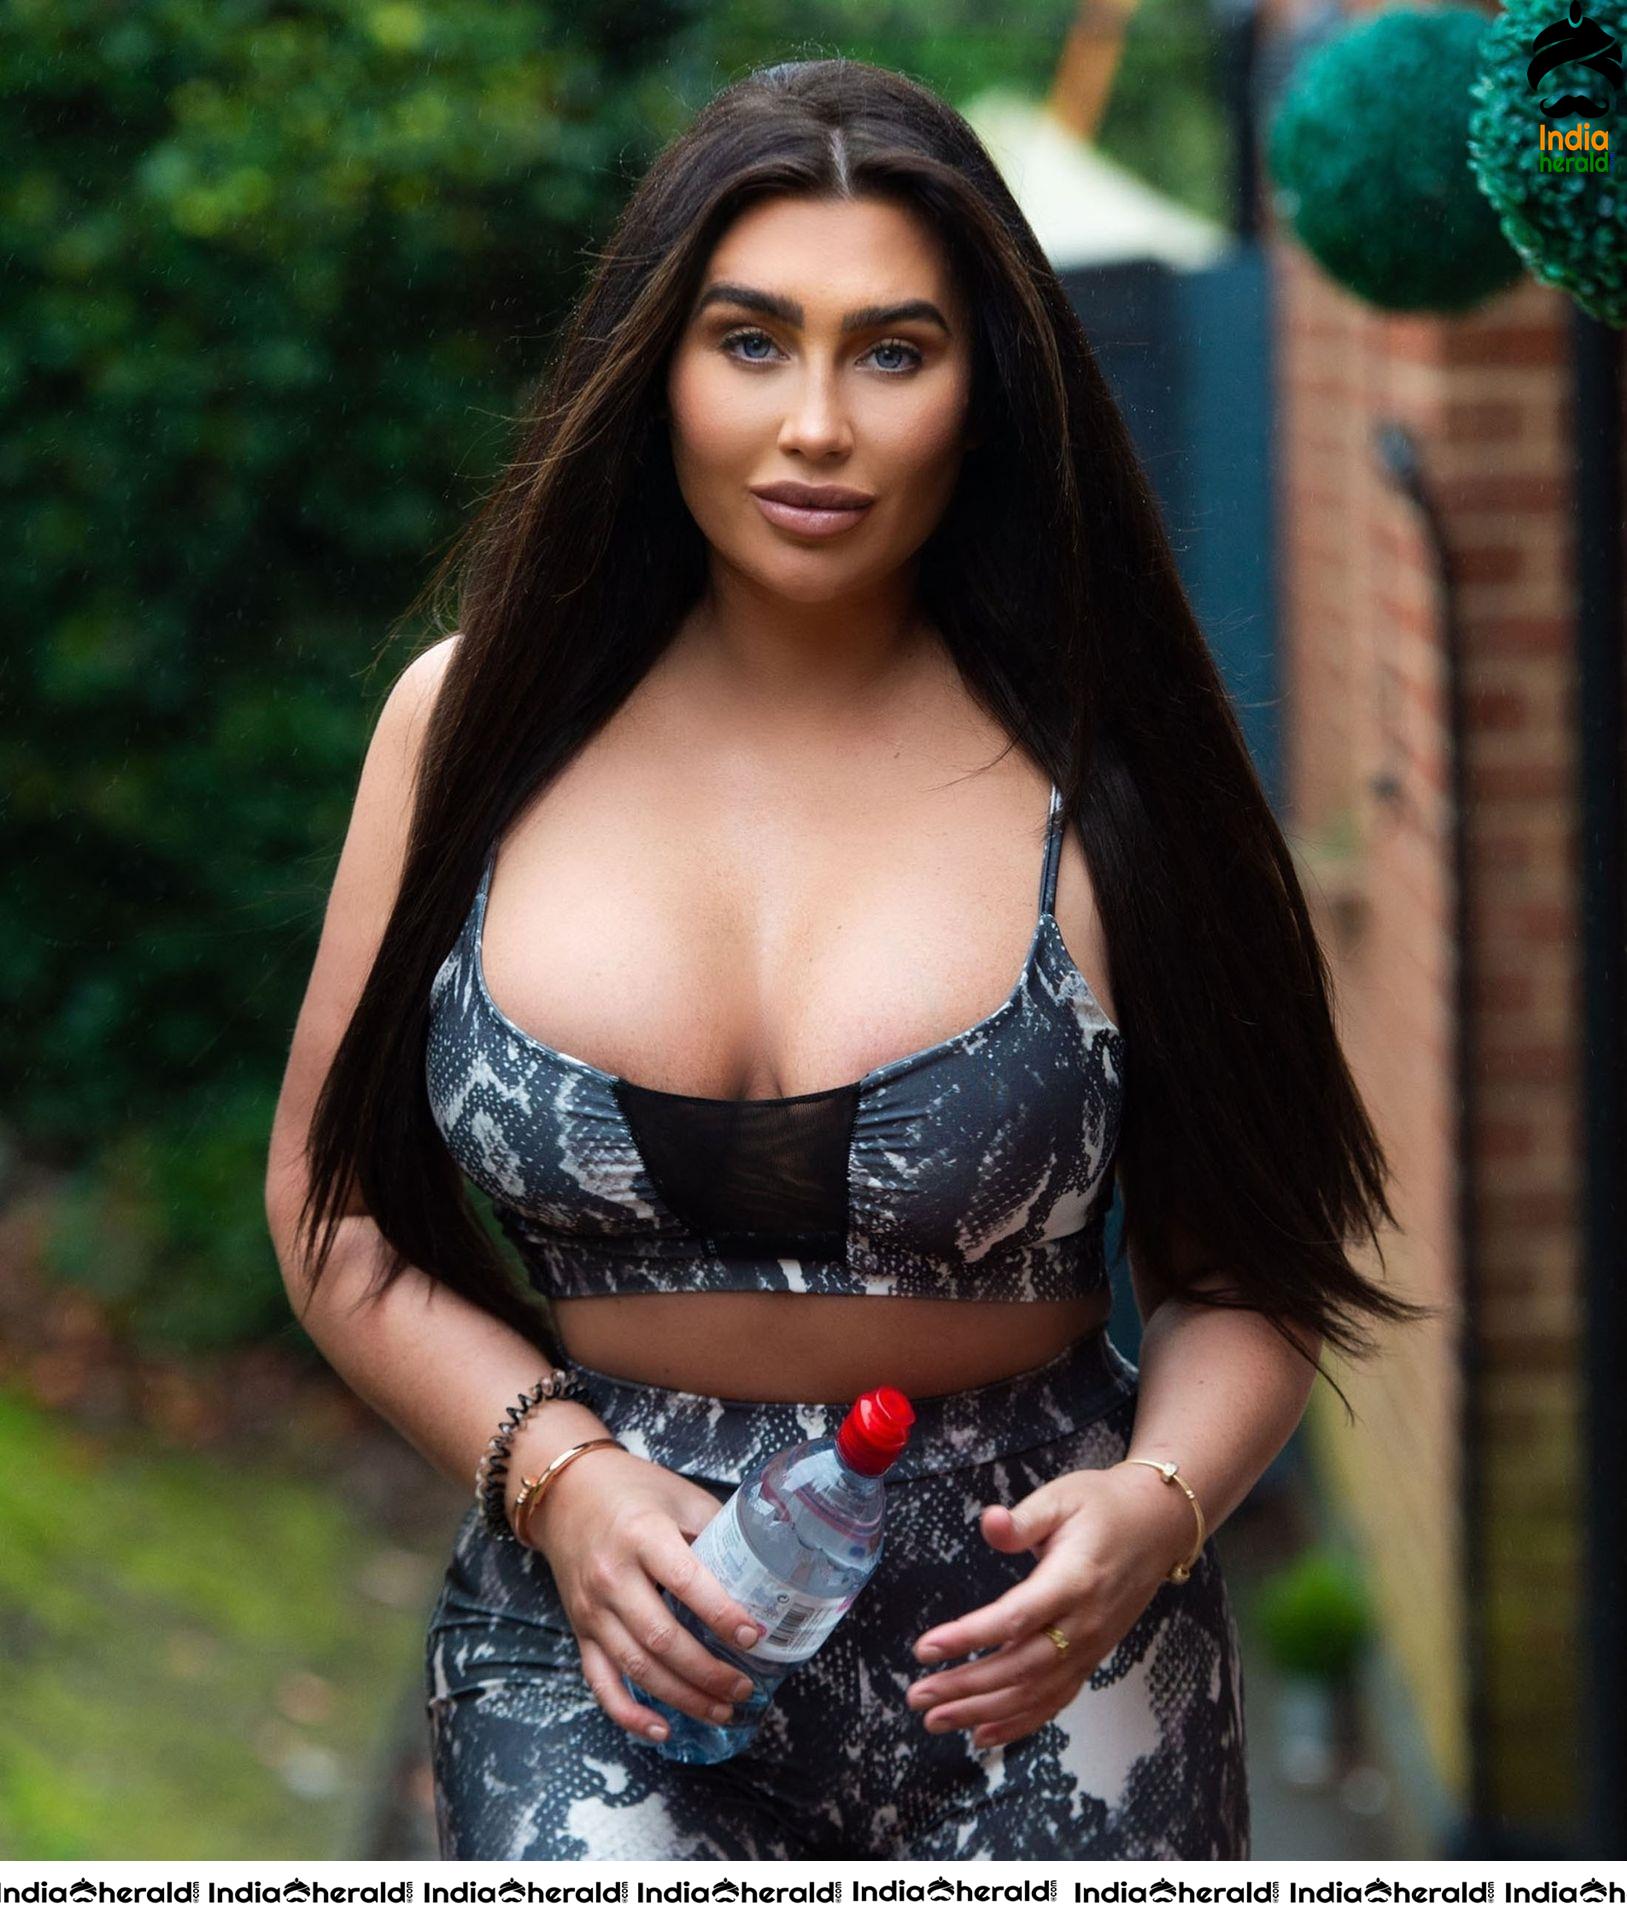 Lauren Goodger flaunts her Big assets as she head out for an exercise session